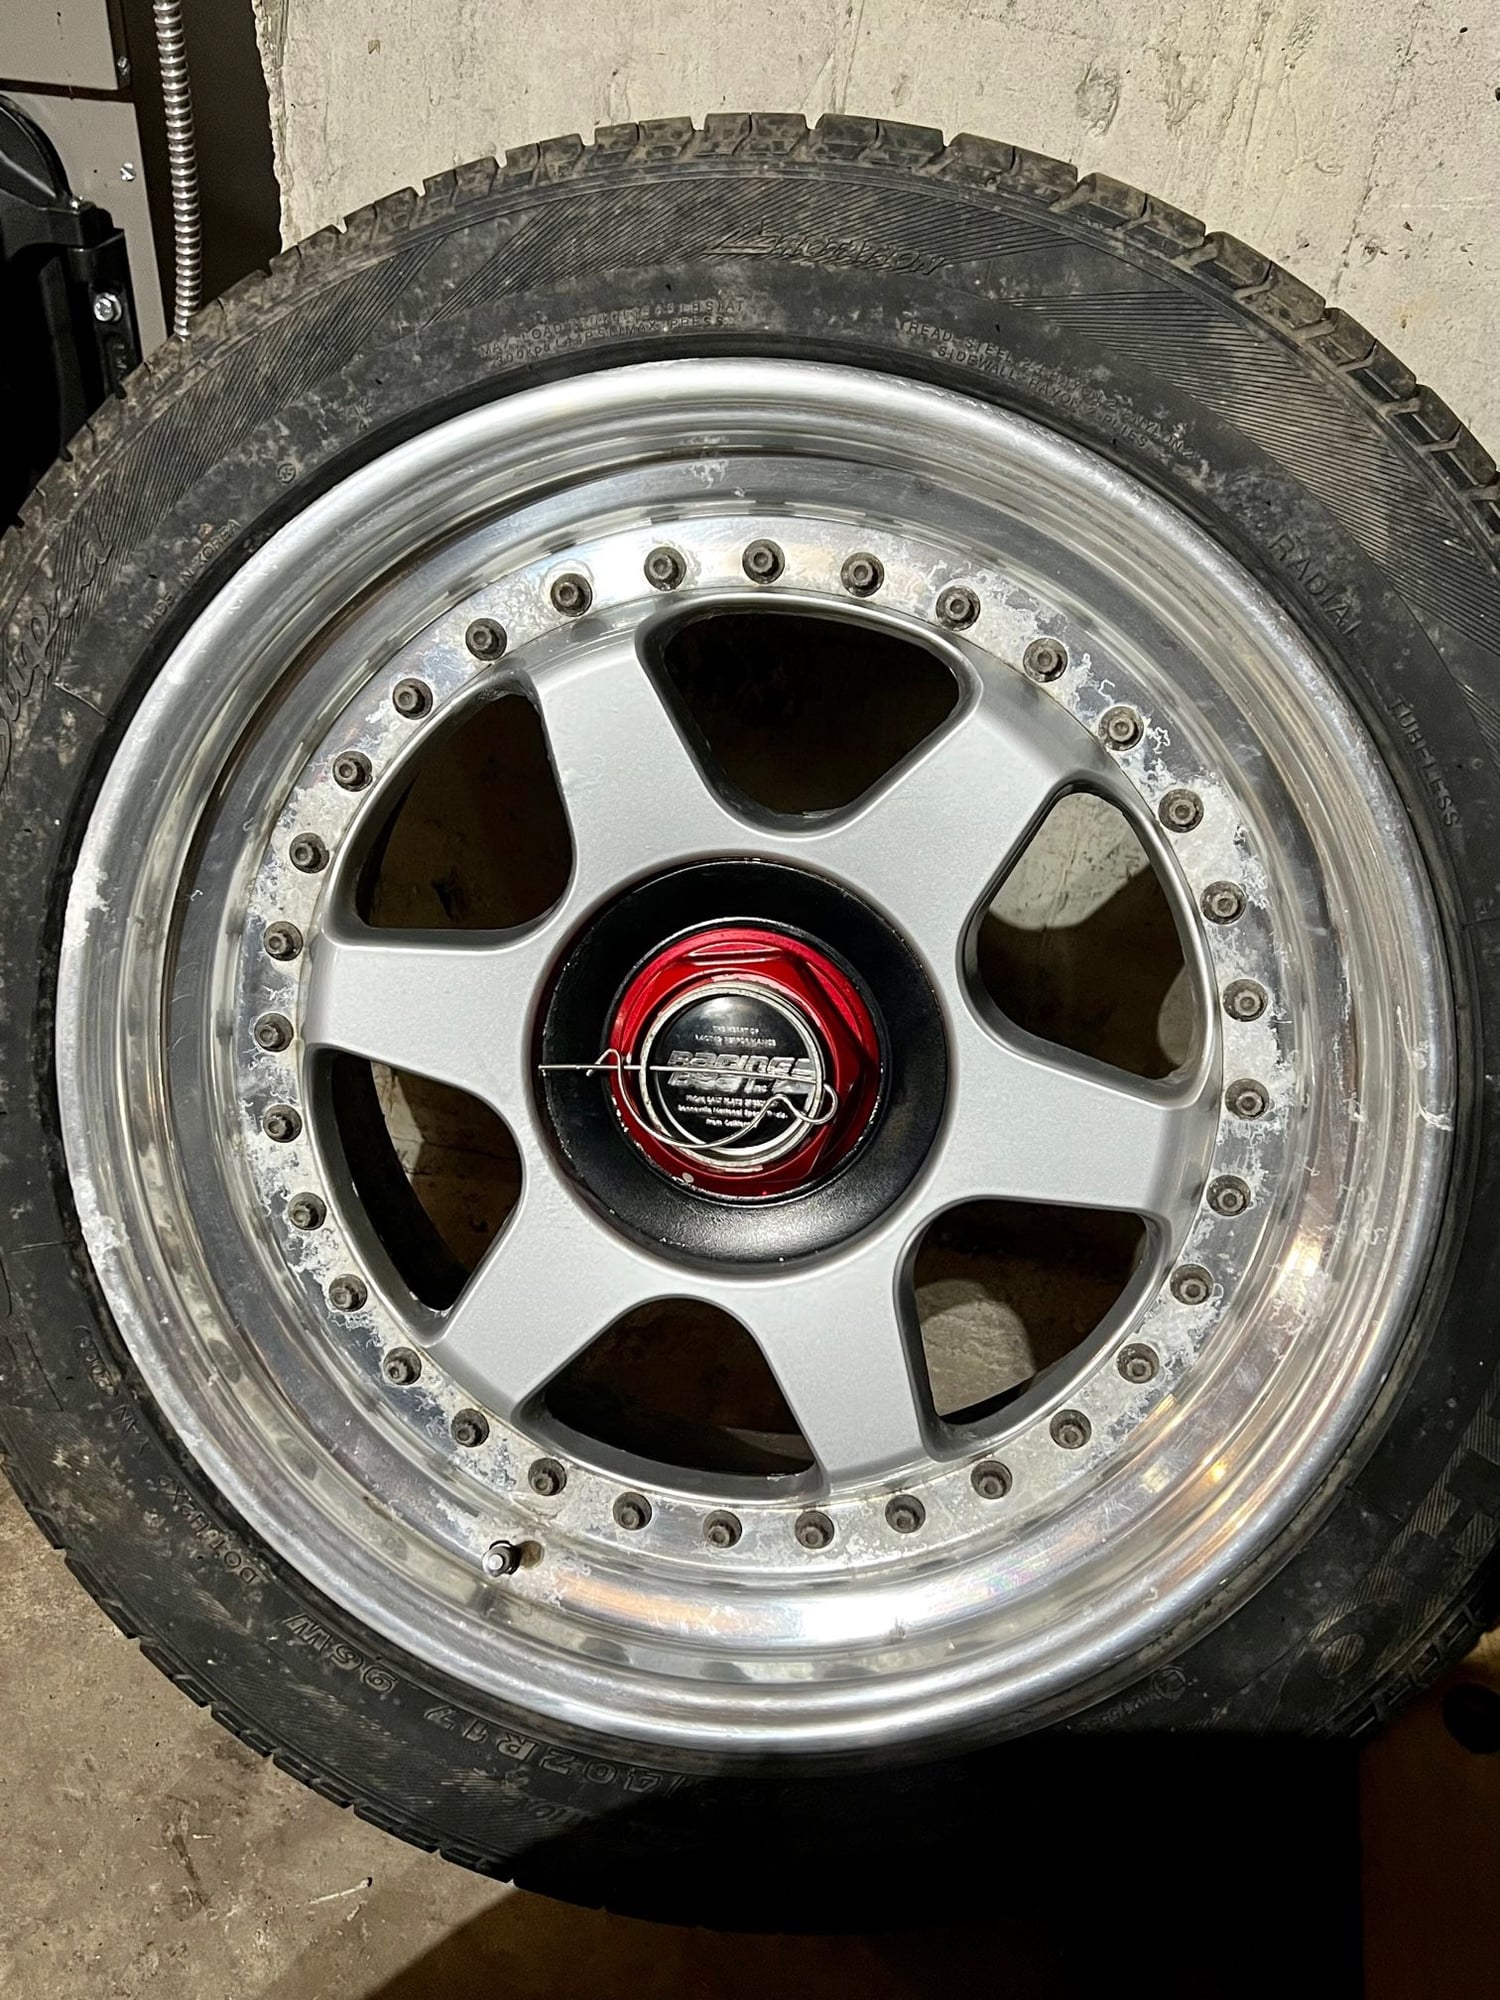 Wheels and Tires/Axles - 17" Racing Beat 3 Piece Wheels - Rare! - Used - 1986 to 2002 Mazda RX-7 - Middletown, NY 10940, United States